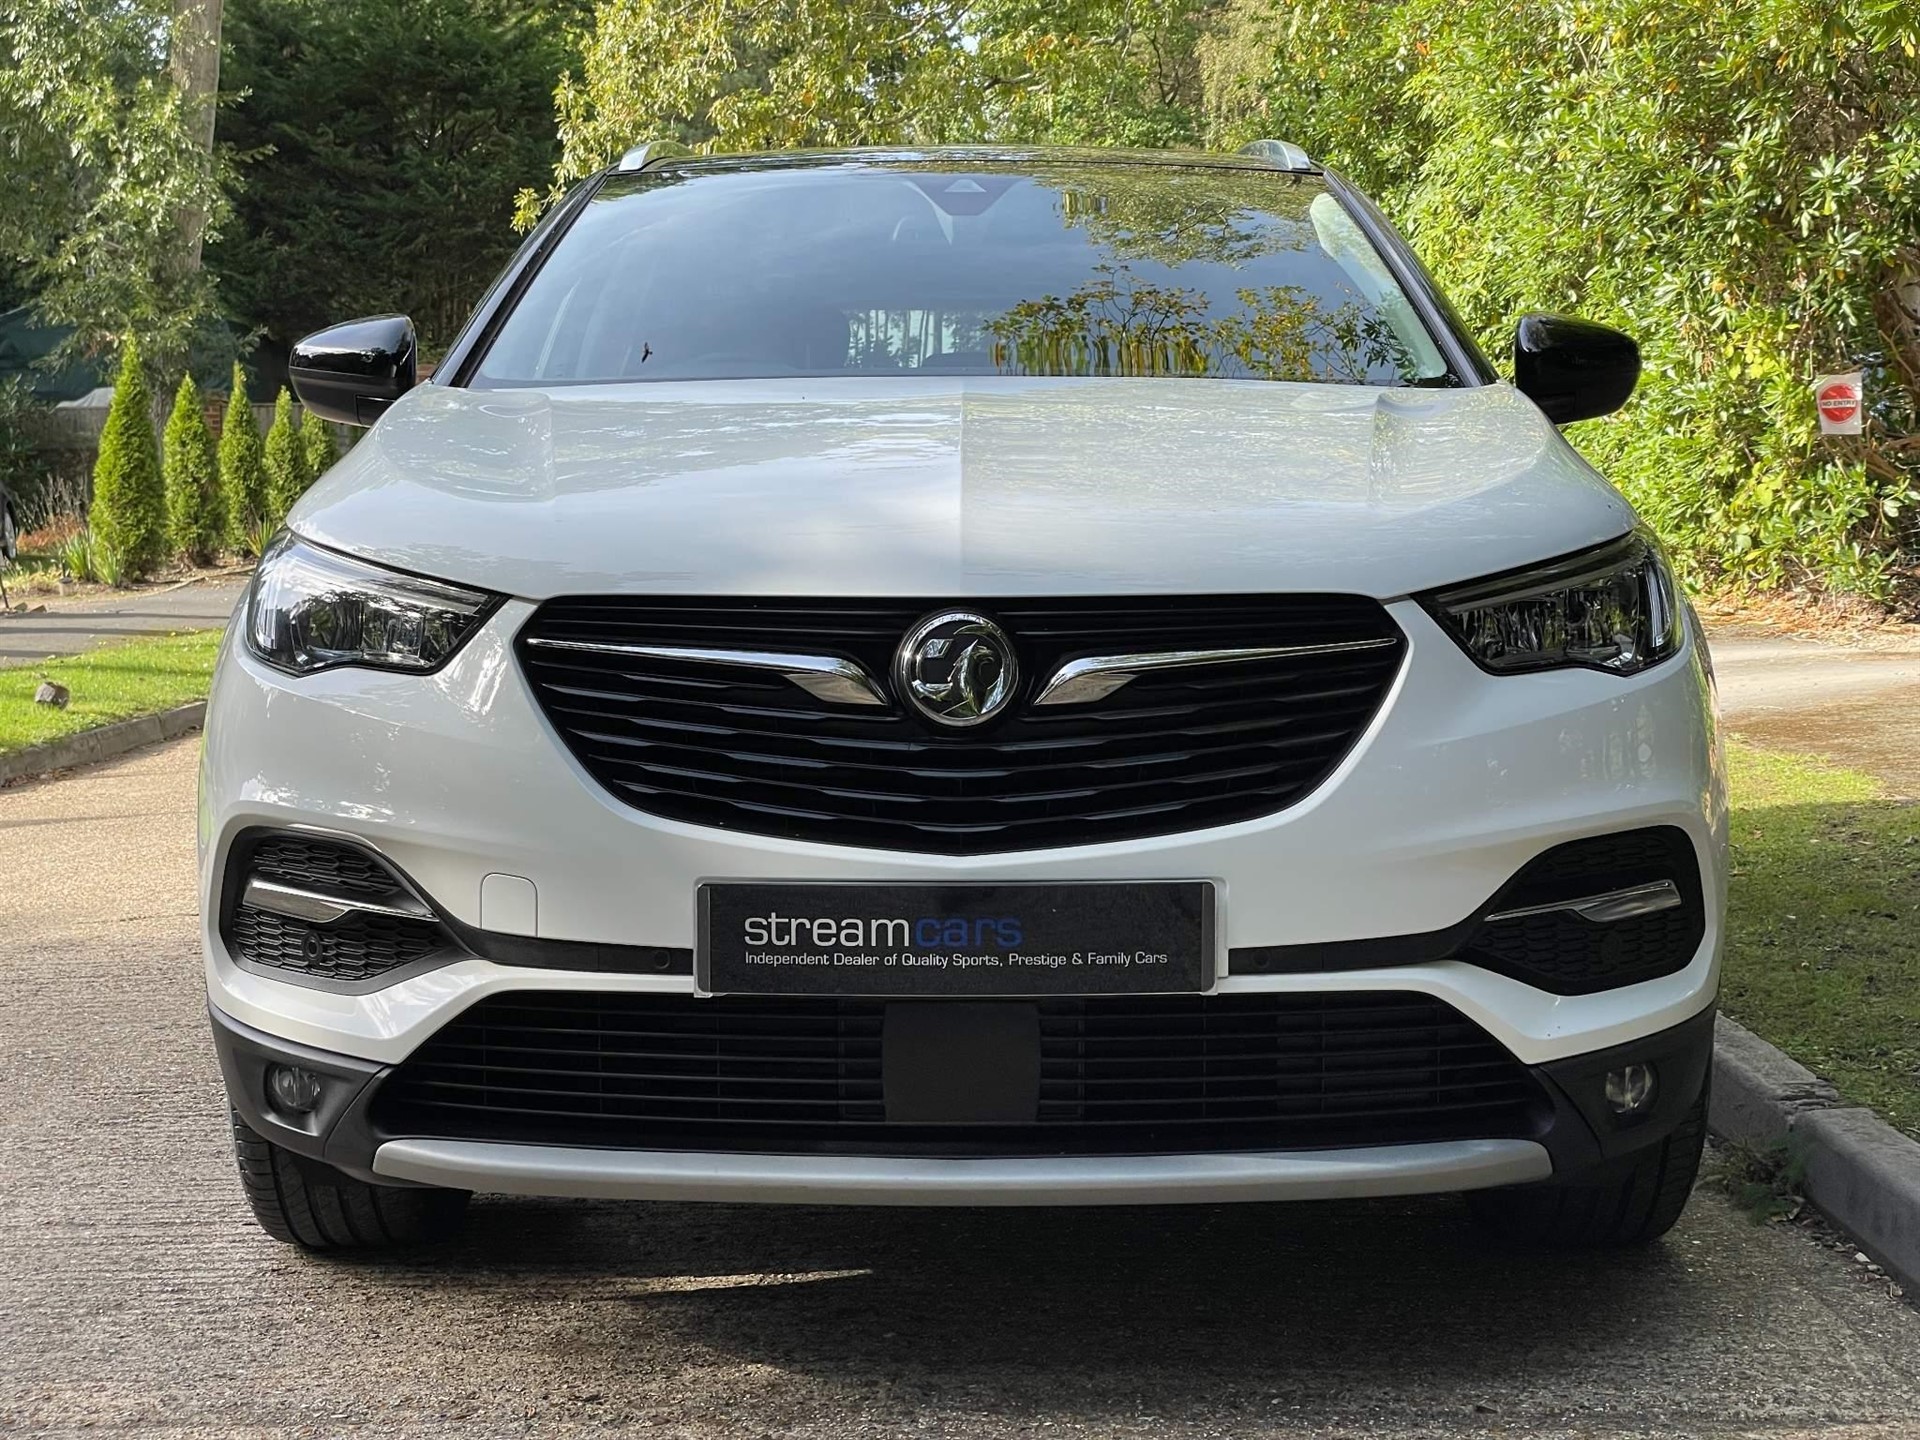 Used Vauxhall Grandland X for sale in Bagshot, Surrey